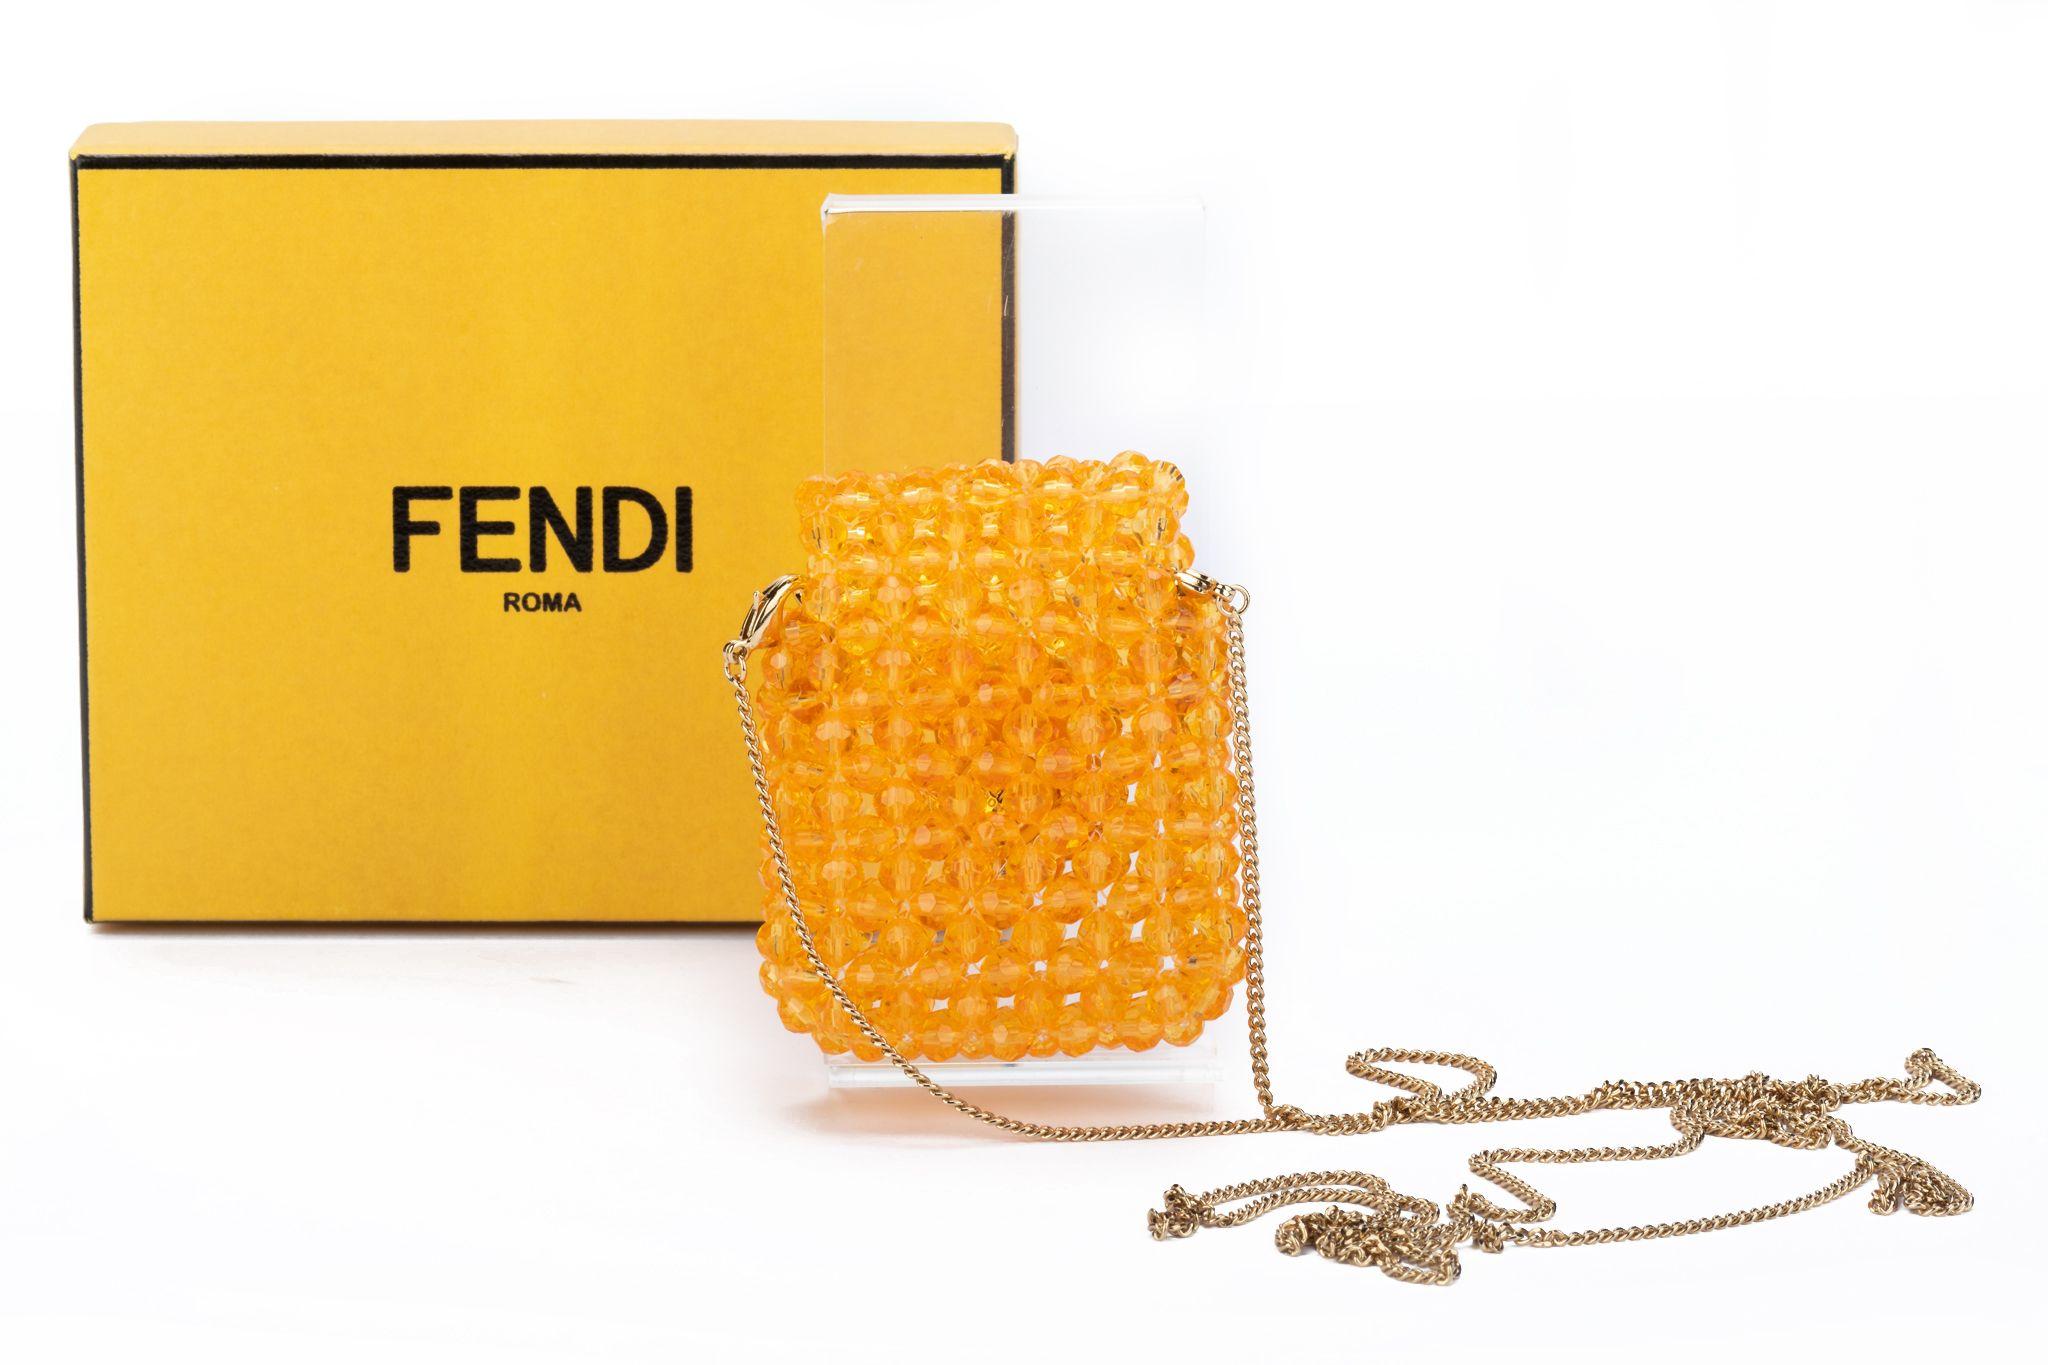 Fendi BNIB pico baguette in pale orange plastic beads with gold hardware. Can be used fro air pods 1 st generation. 23 inch detachable shoulder strap Comes with booklet, box and original dustcover.